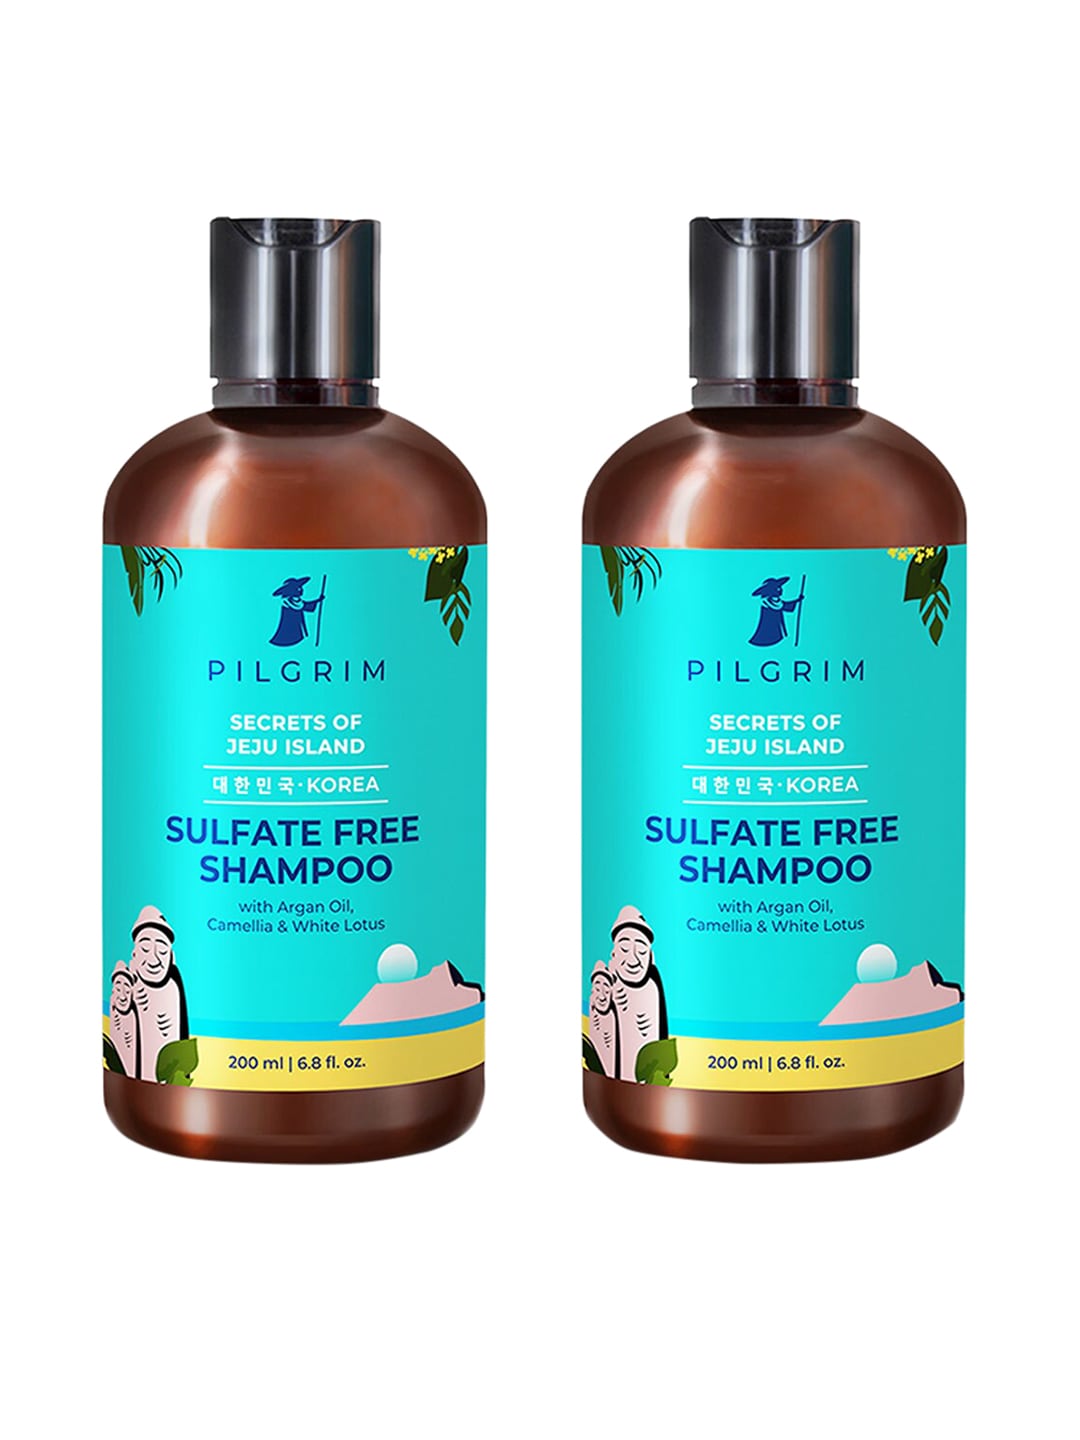 Pilgrim Set of 2 Mild Sulphate Free Shampoo Infused with Argan Oil Price in India